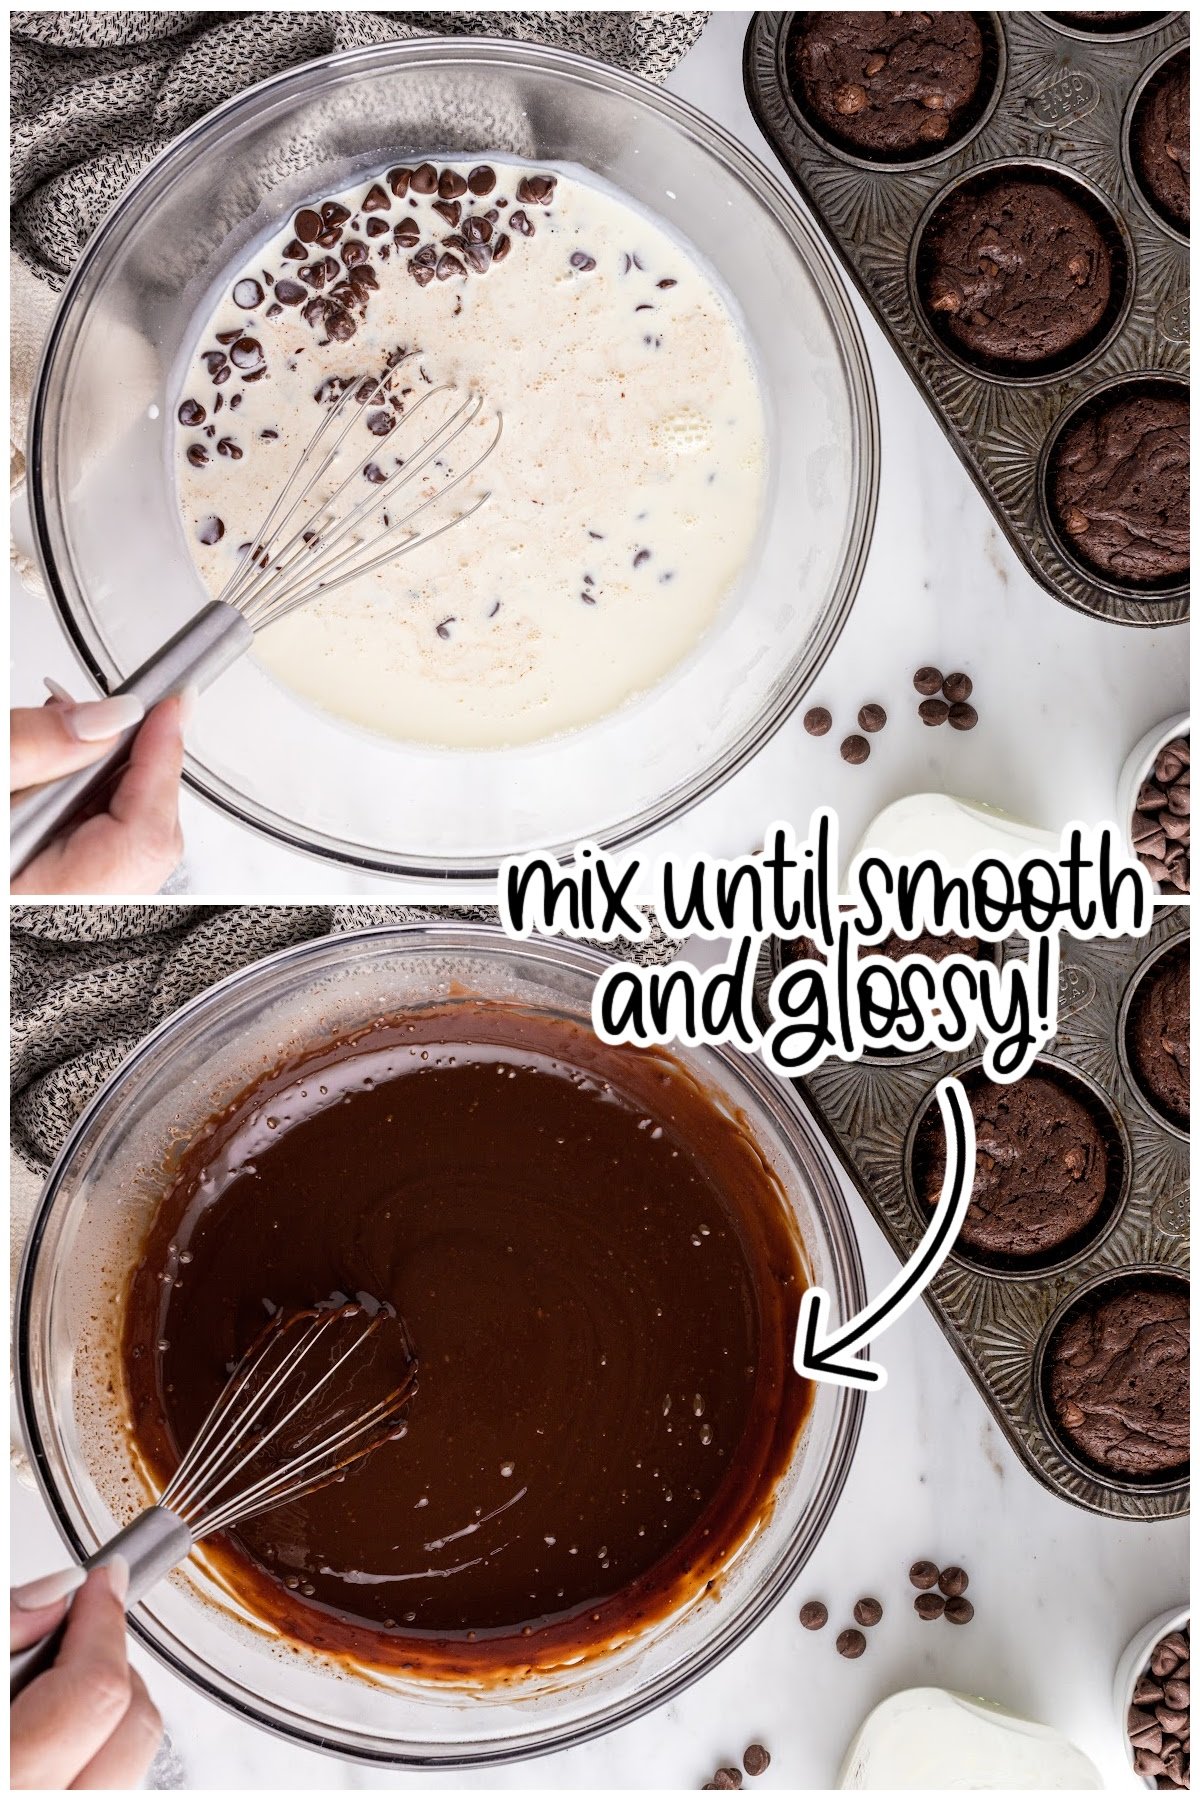 Two images of chips being mixed into heavy cream and chocolate mixed in with cream with text overlay.